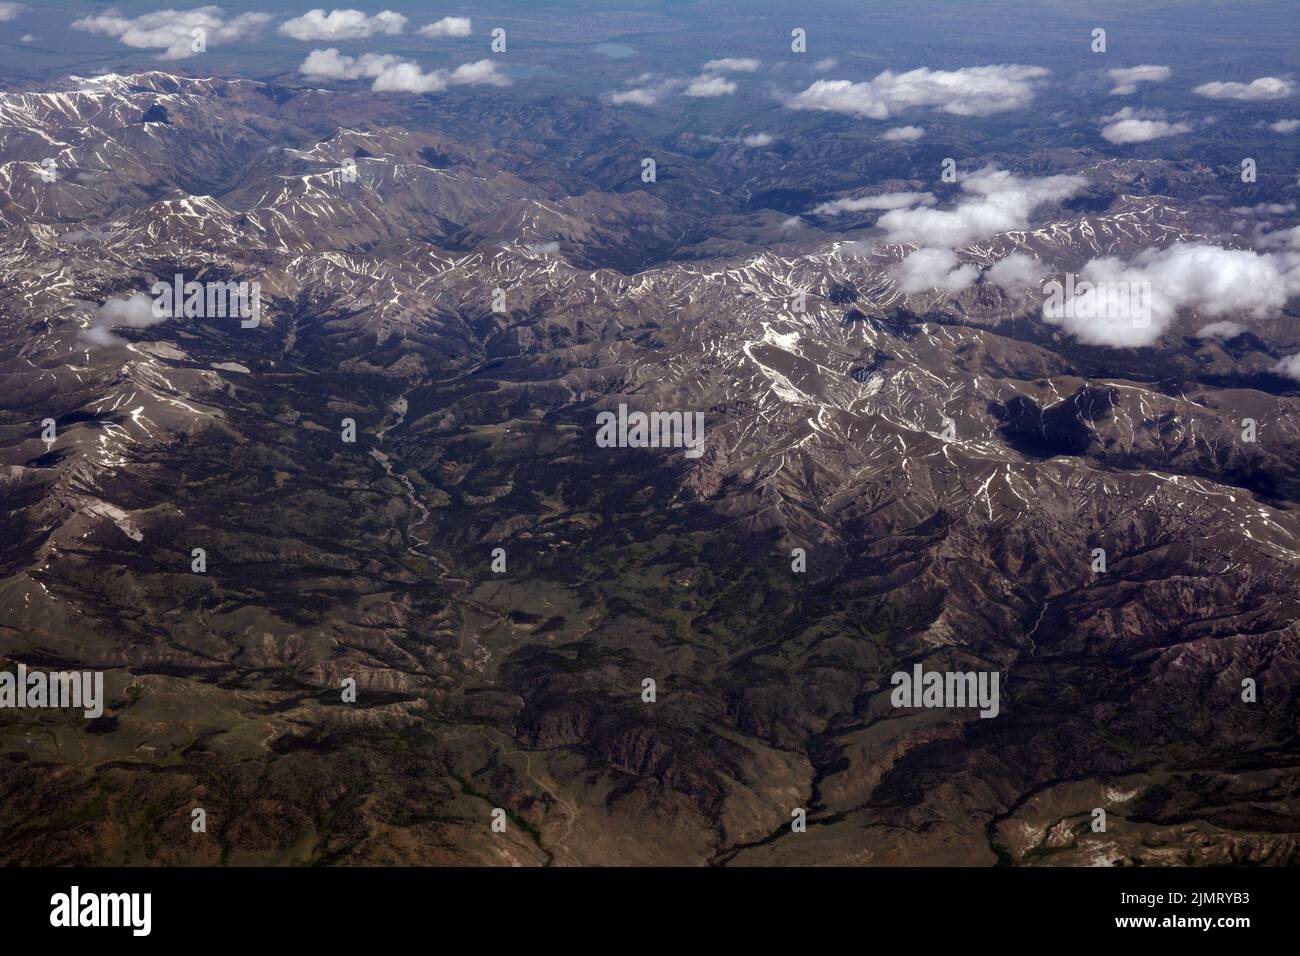 Aerial view of the Shoshone National Forest and the Absaroka Mountains, a sub-range of the Rocky Mountains, in northwest Wyoming, United States. Stock Photo